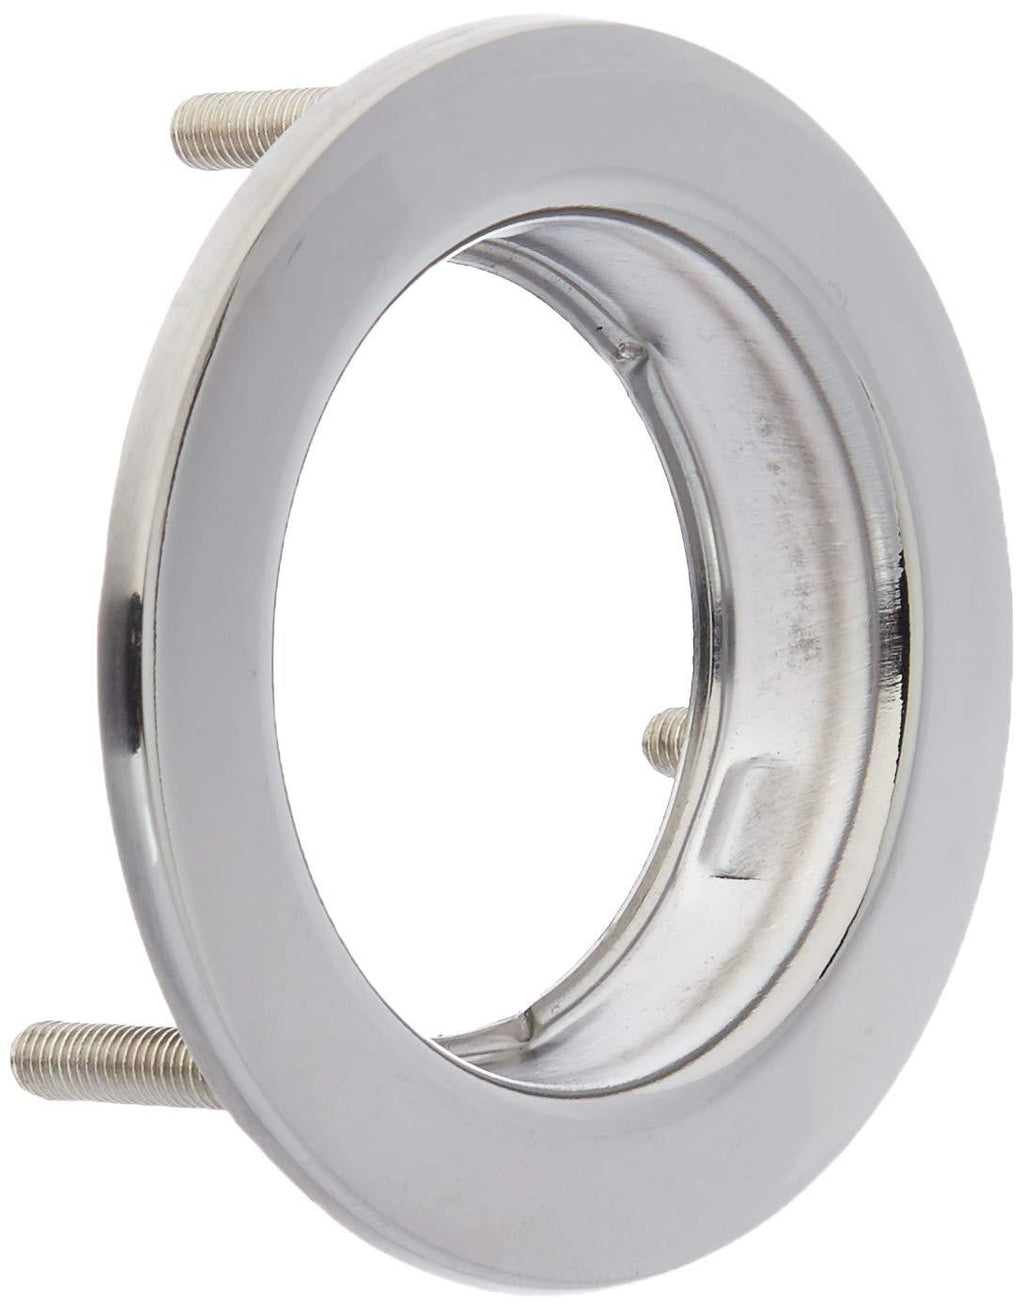  [AUSTRALIA] - GG Grand General 87223 Stainless Steel Bezel (S.S. Flange Mount with 3 Studs for 2") 2” Round